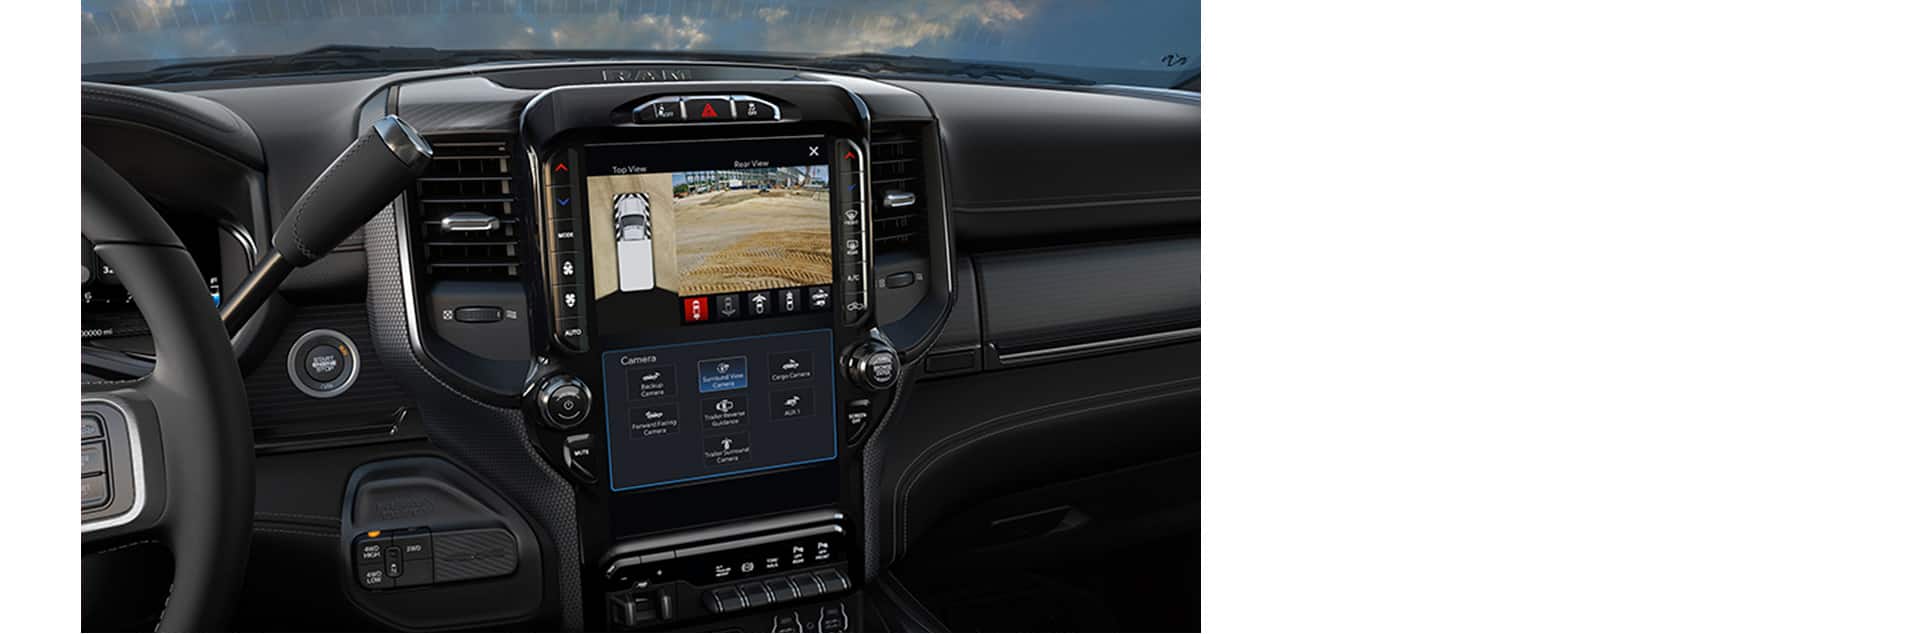 The Driver Information Digital Cluster in the 2024 Ram 2500 displaying the output of the Surround View Camera.